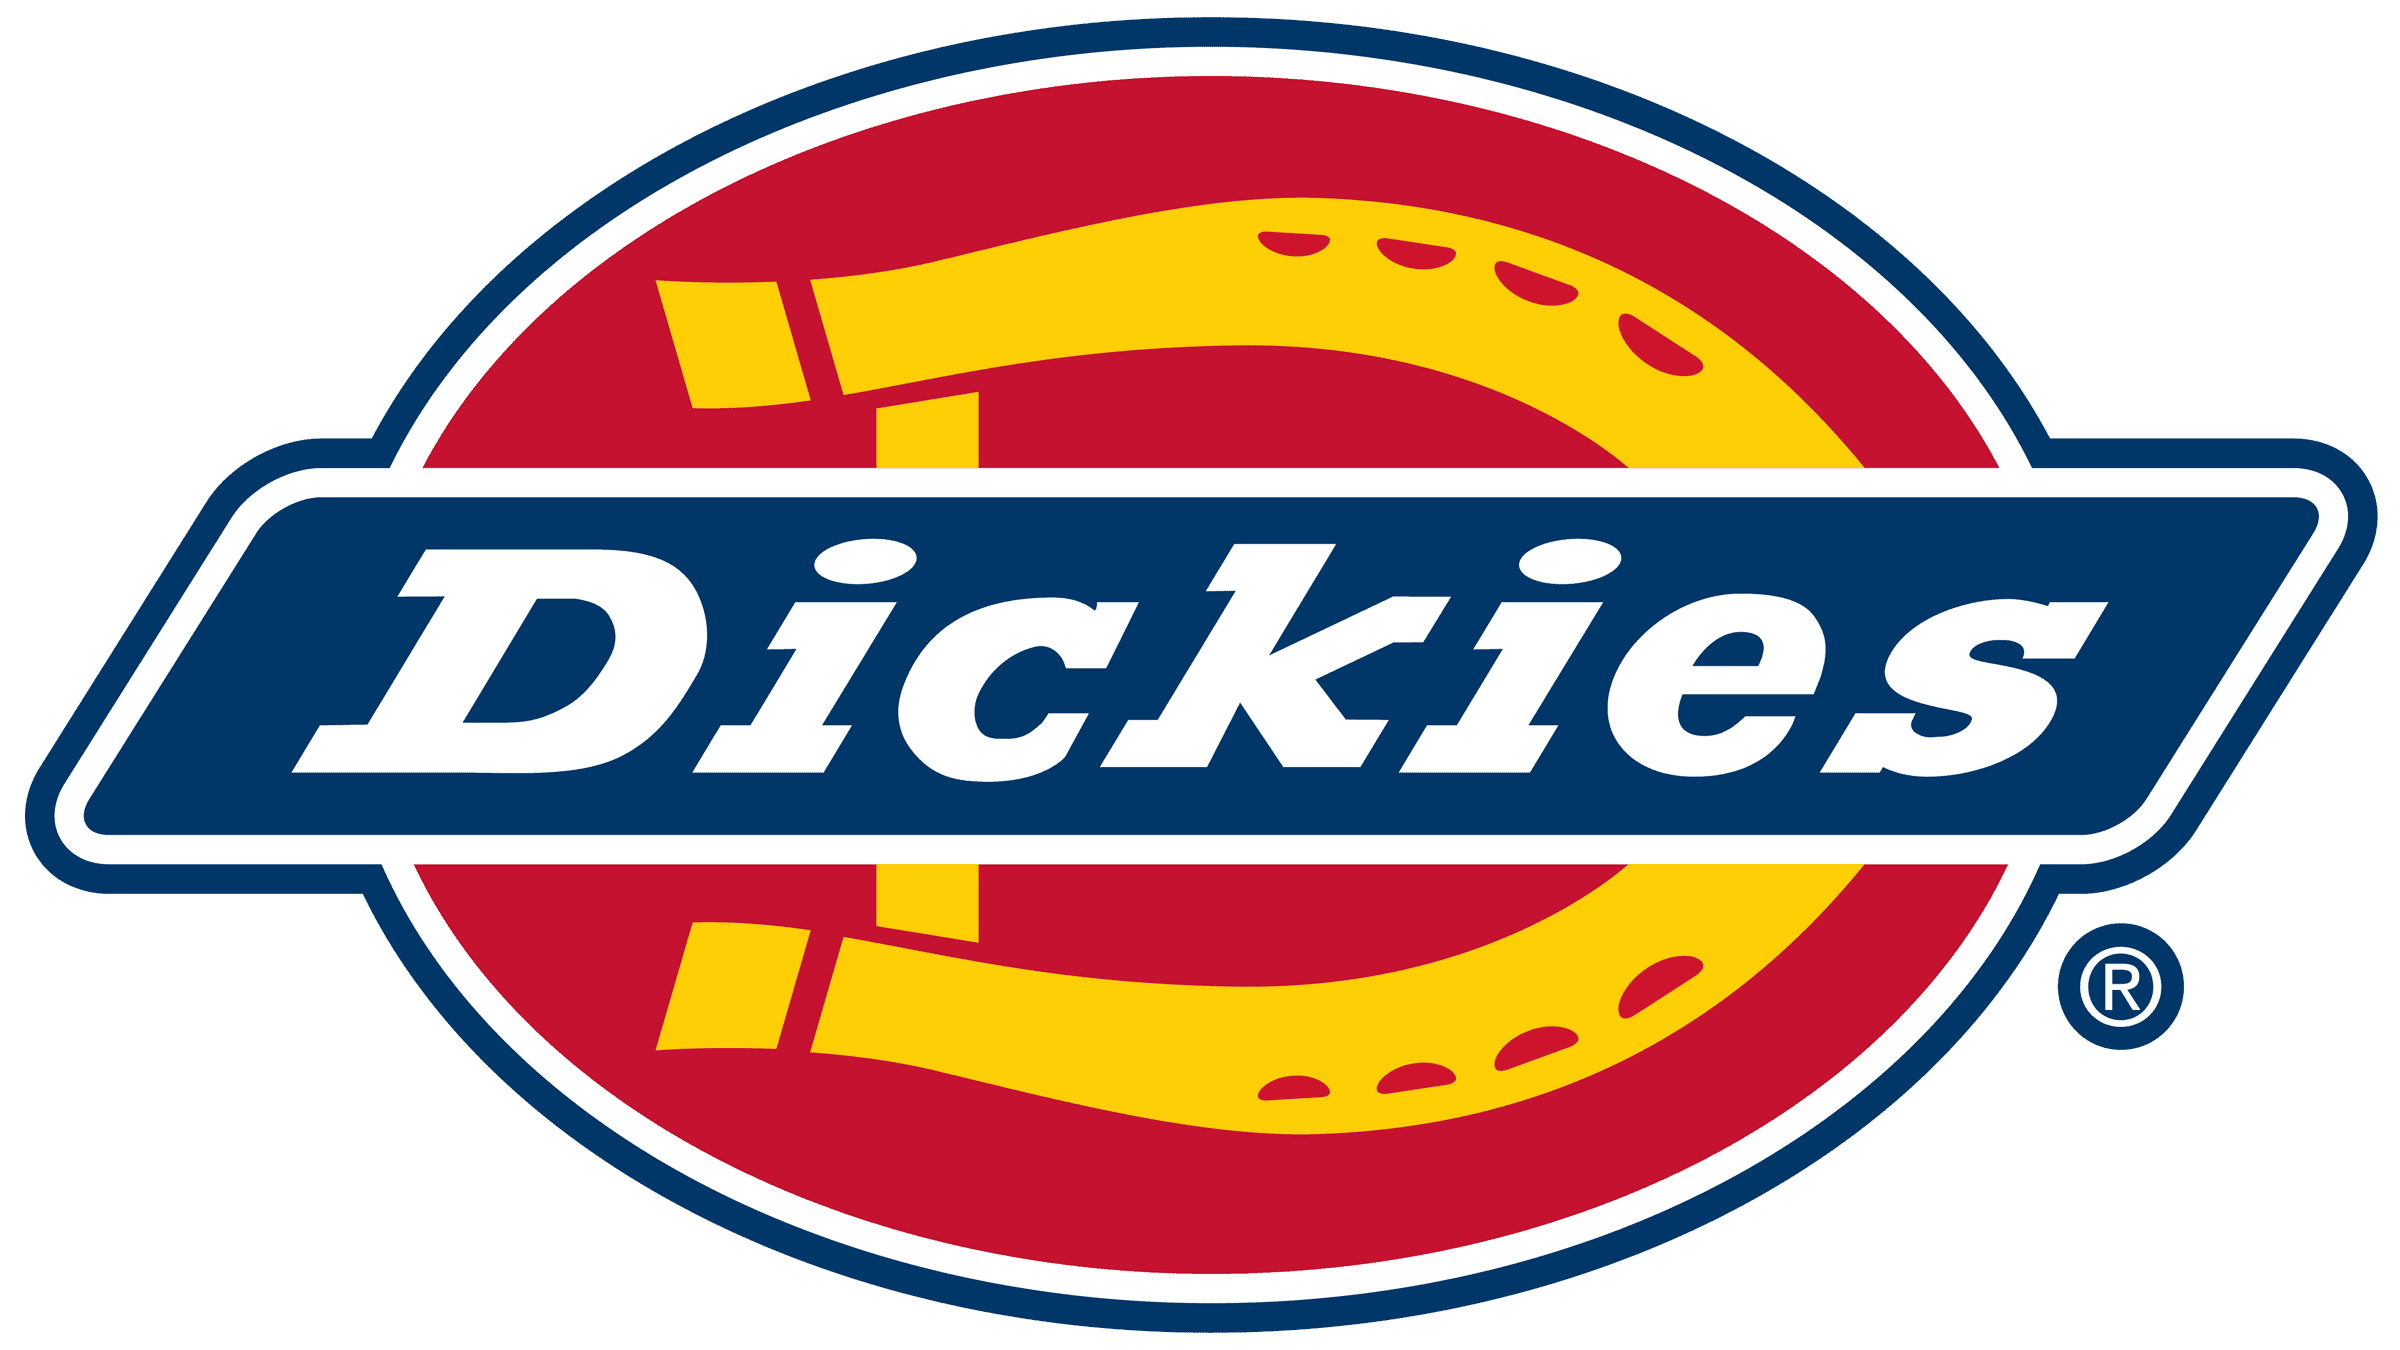 Dickies logo and meaning, history,